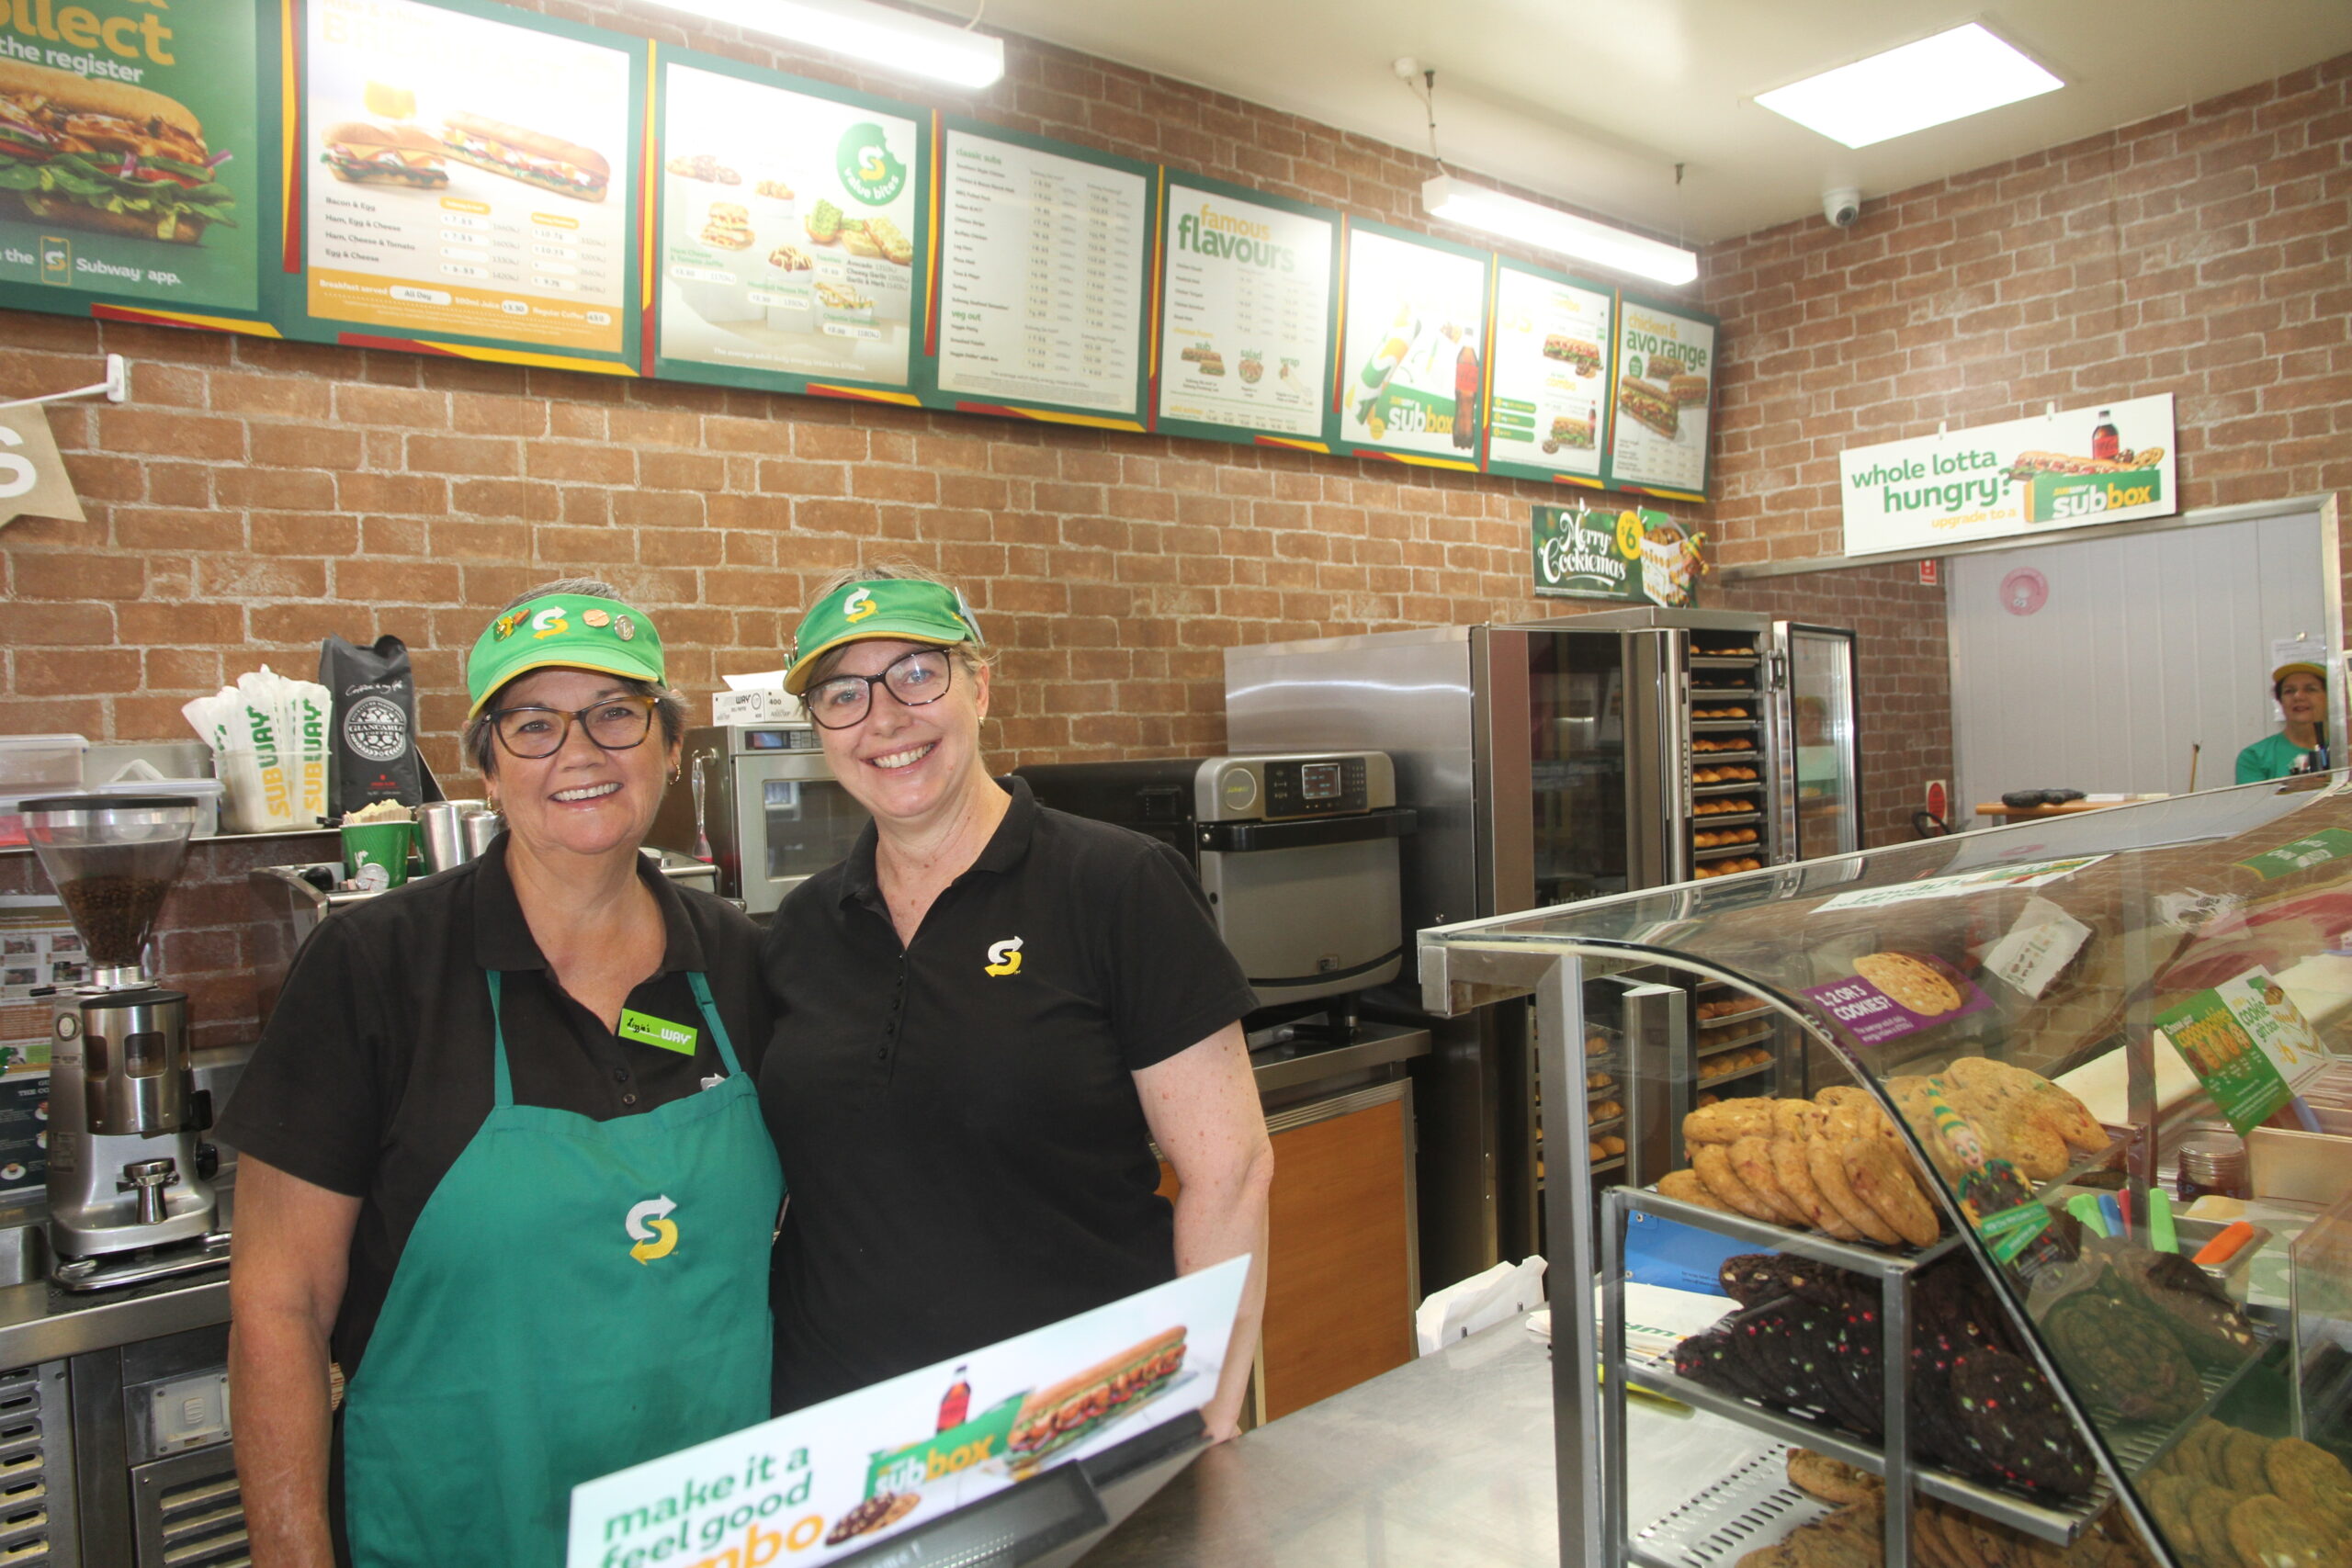 Farewell to a familiar face at Subway after 21 years